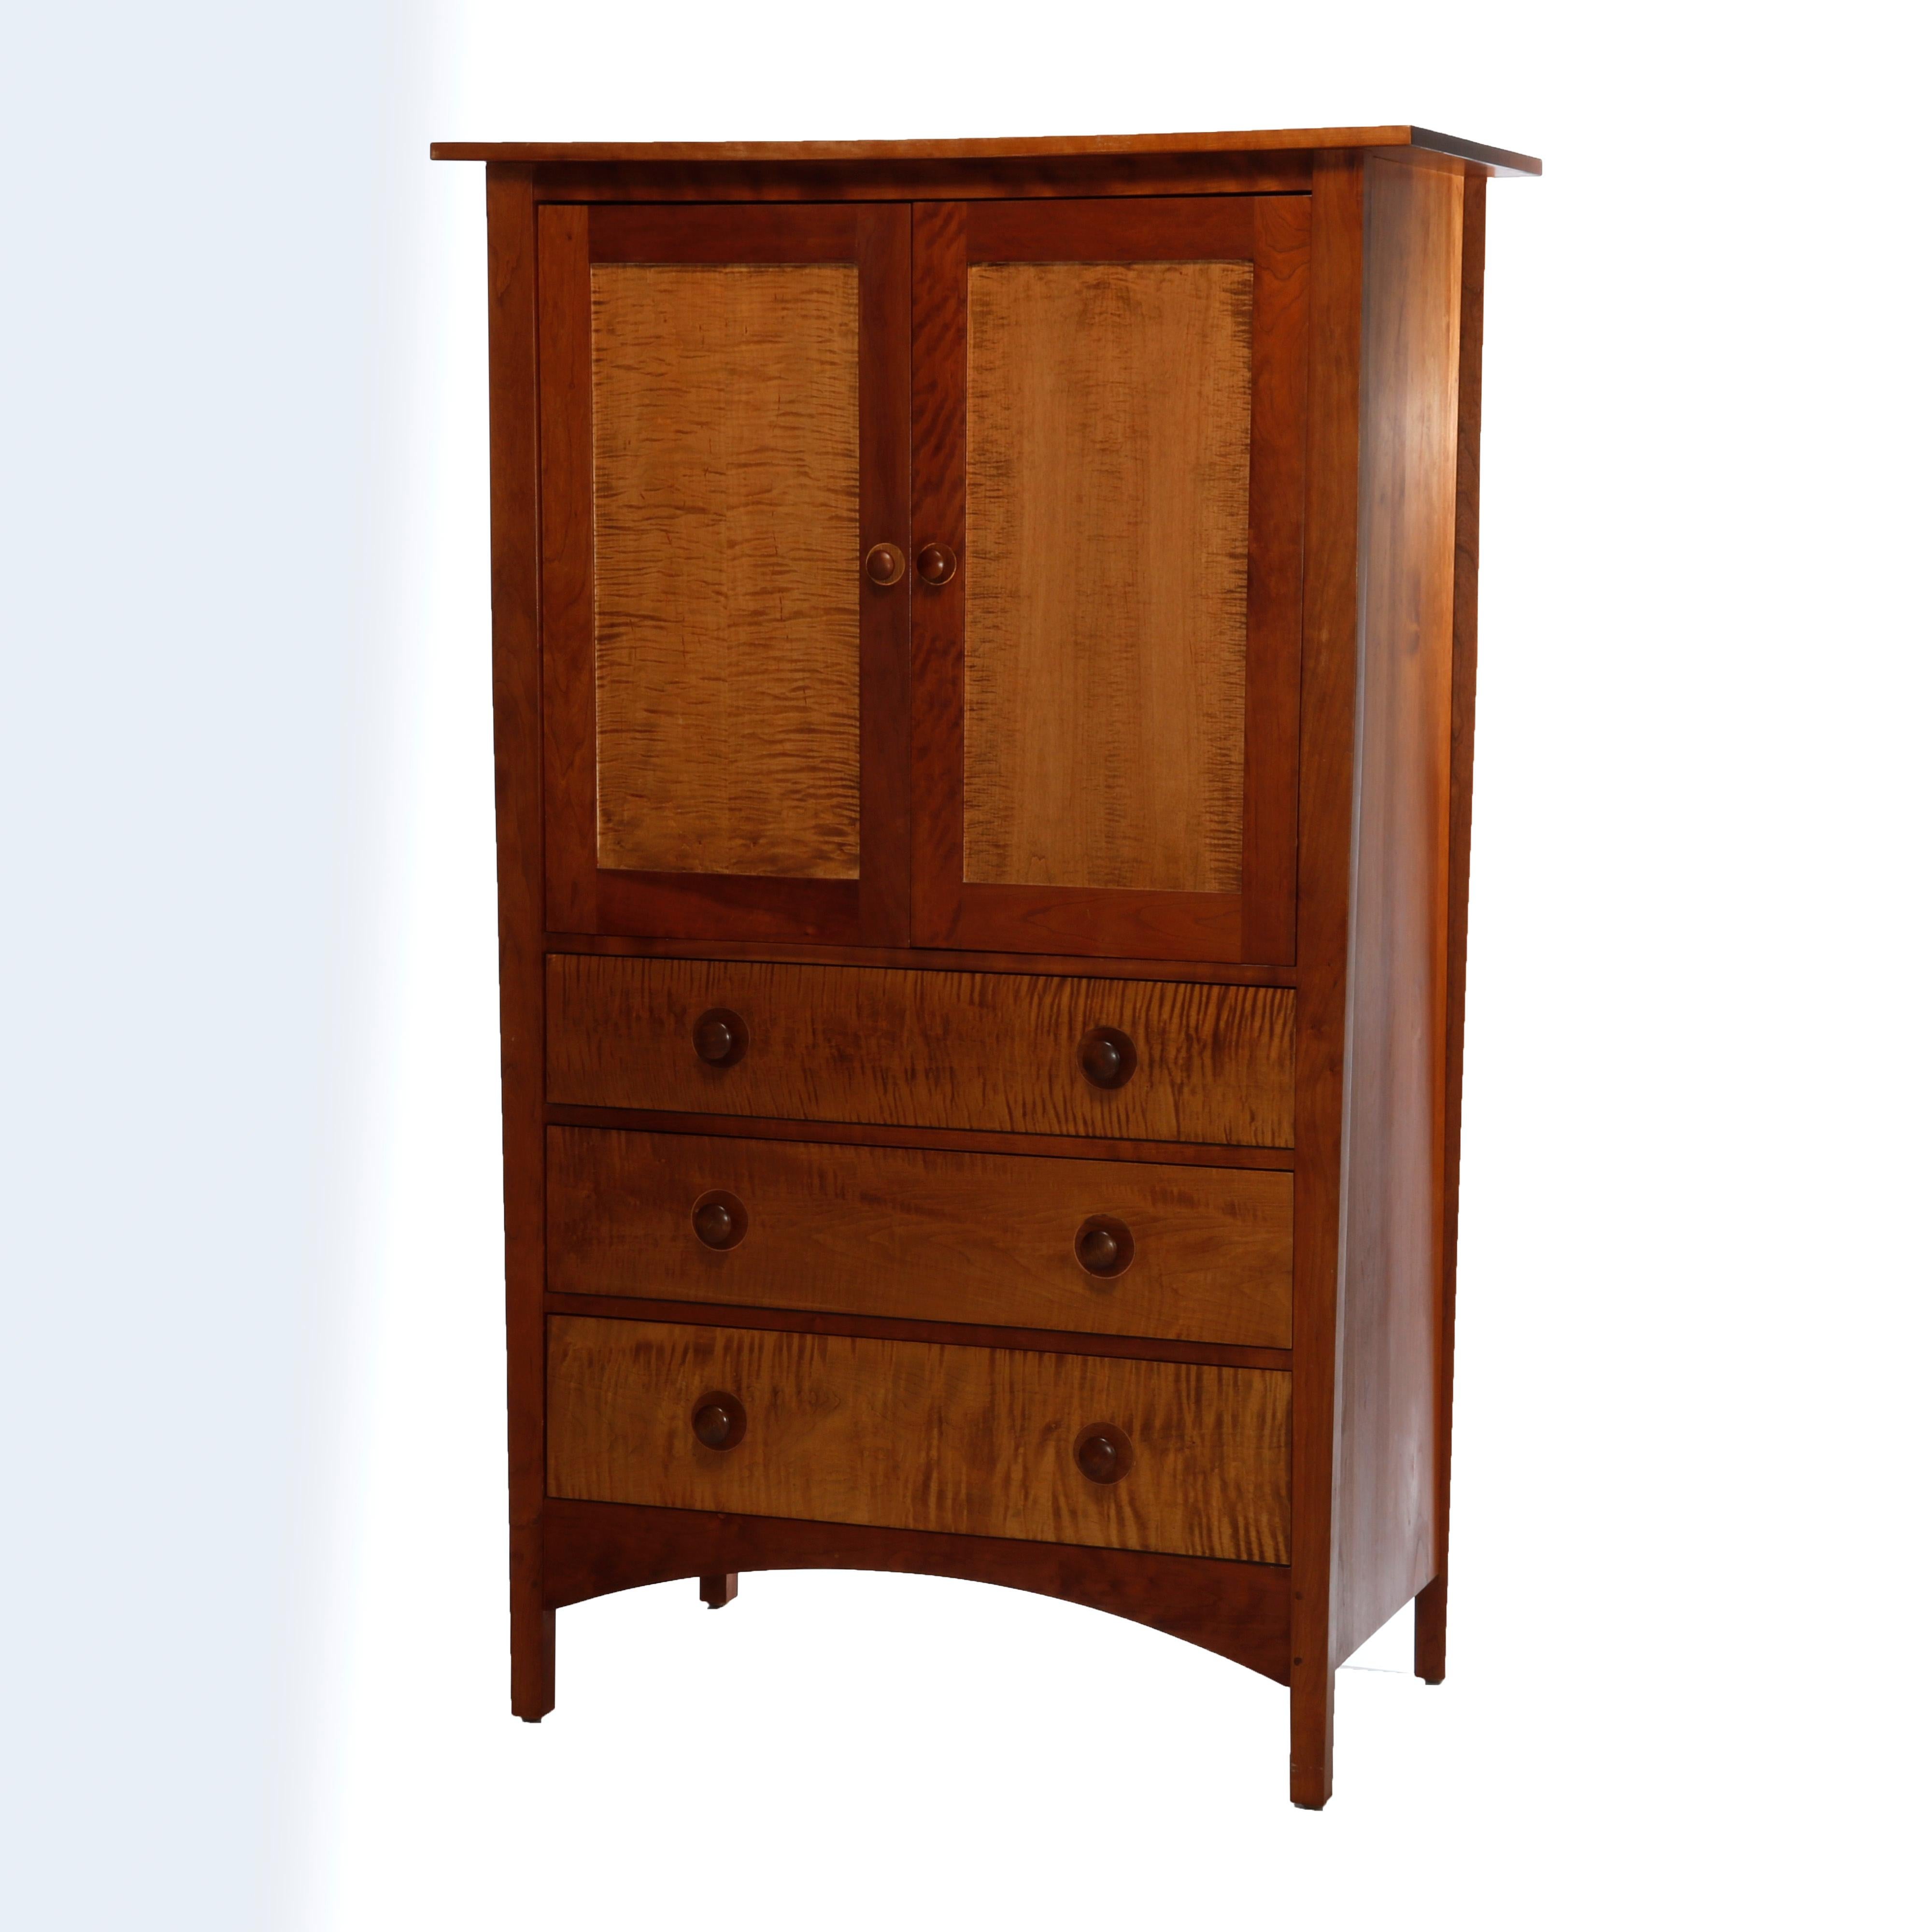 An Arts & Crafts style Harvey Ellis Design armoire entertainment center by Stickley offers birdseye maple construction with upper cabinet surmounting three long drawers, maker mark as photographed, 20th century

Measures - 68.5'' H x 42.5'' W x